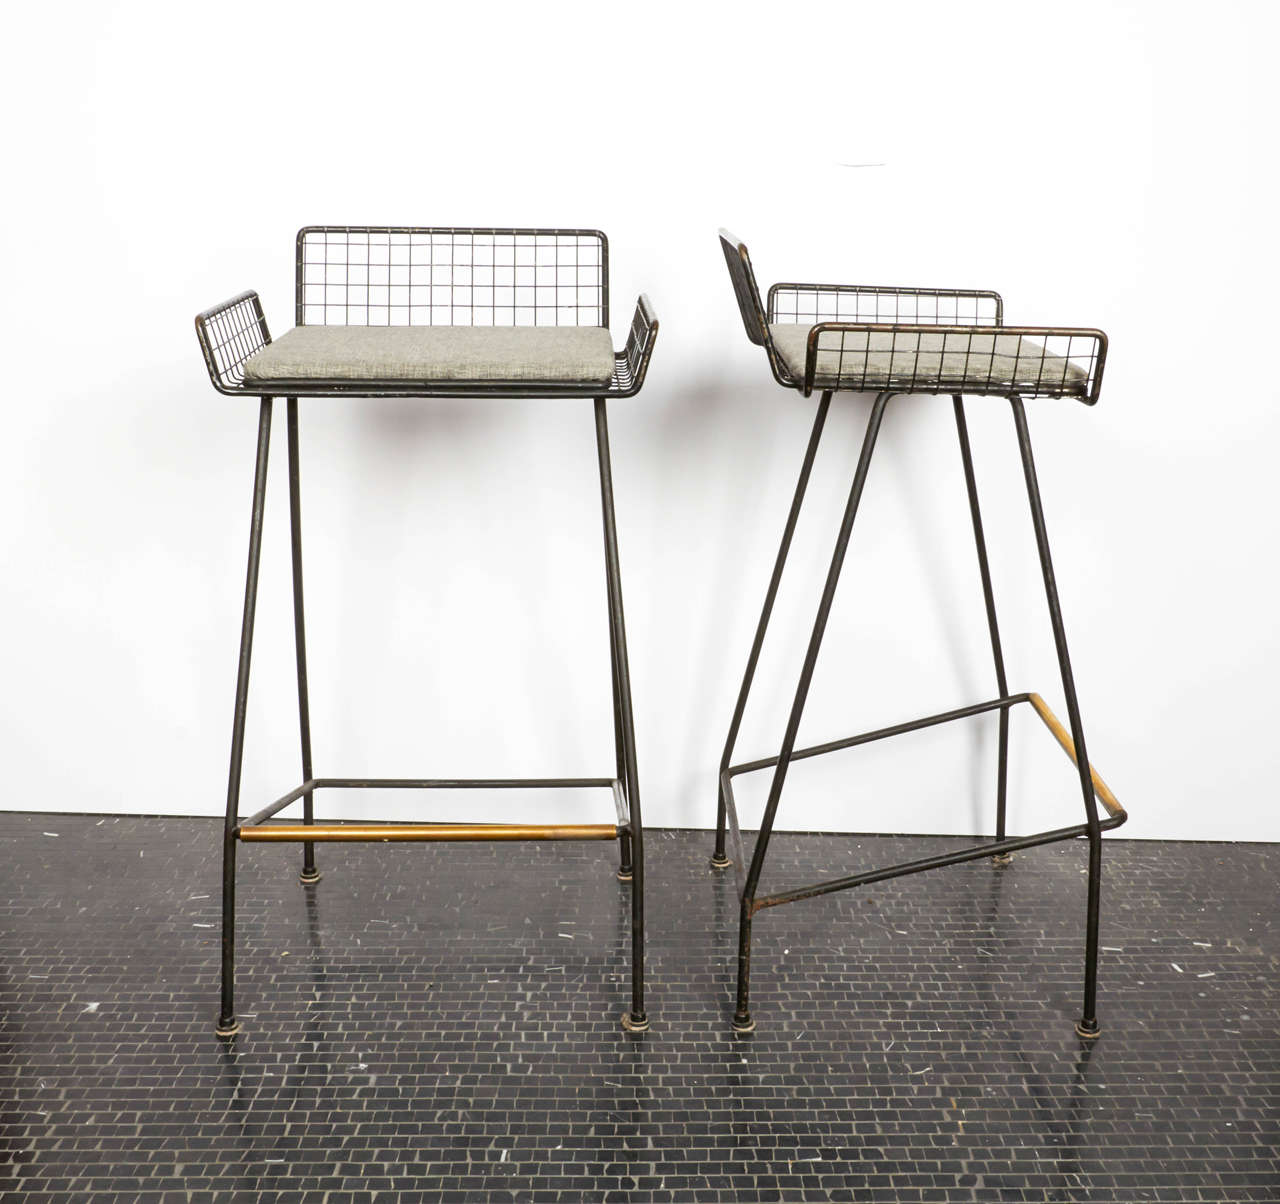 Pair of Tony Paul iron and brass bar stools, 1950s, American.